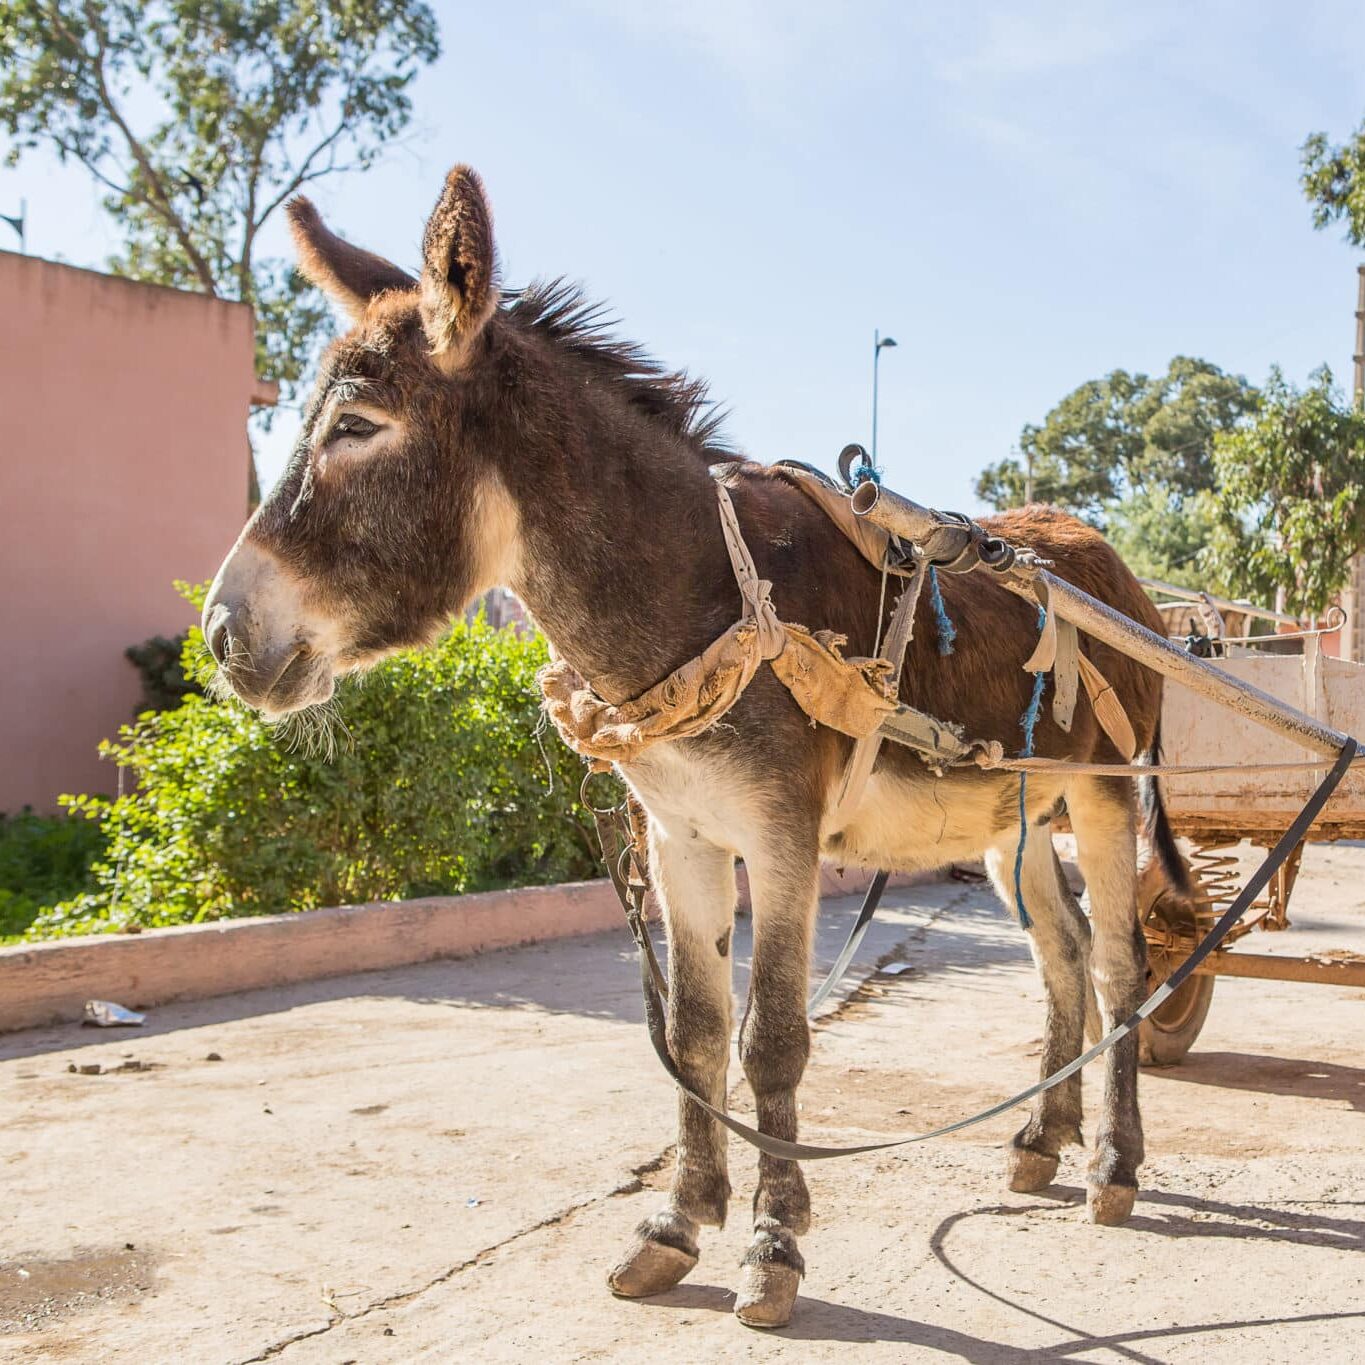 brown donkey is standing attached to a cart in Morocco